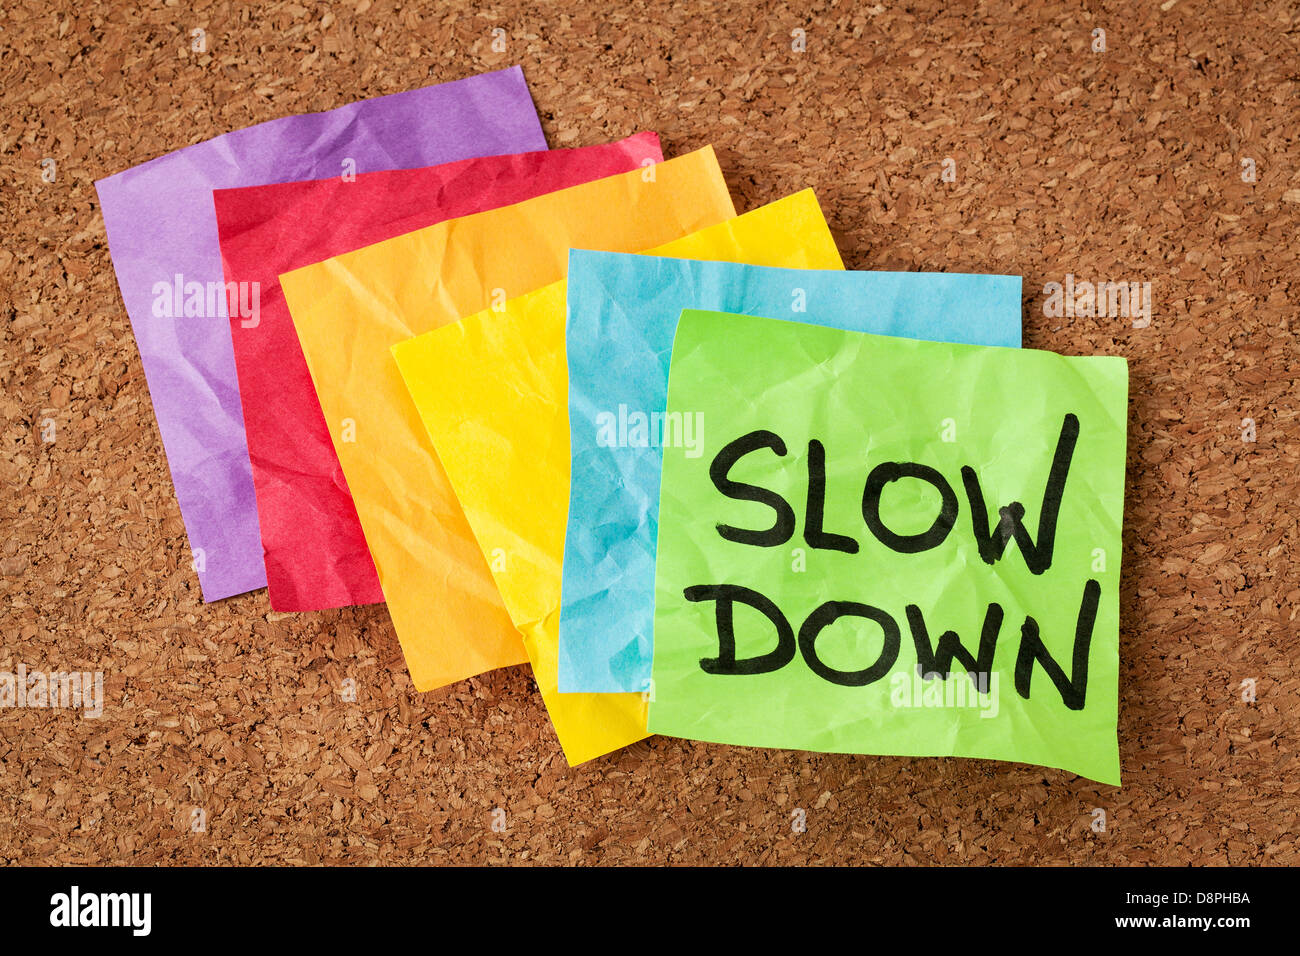 slow down - lifestyle concept or advice - handwriting on colorful sticky notes Stock Photo